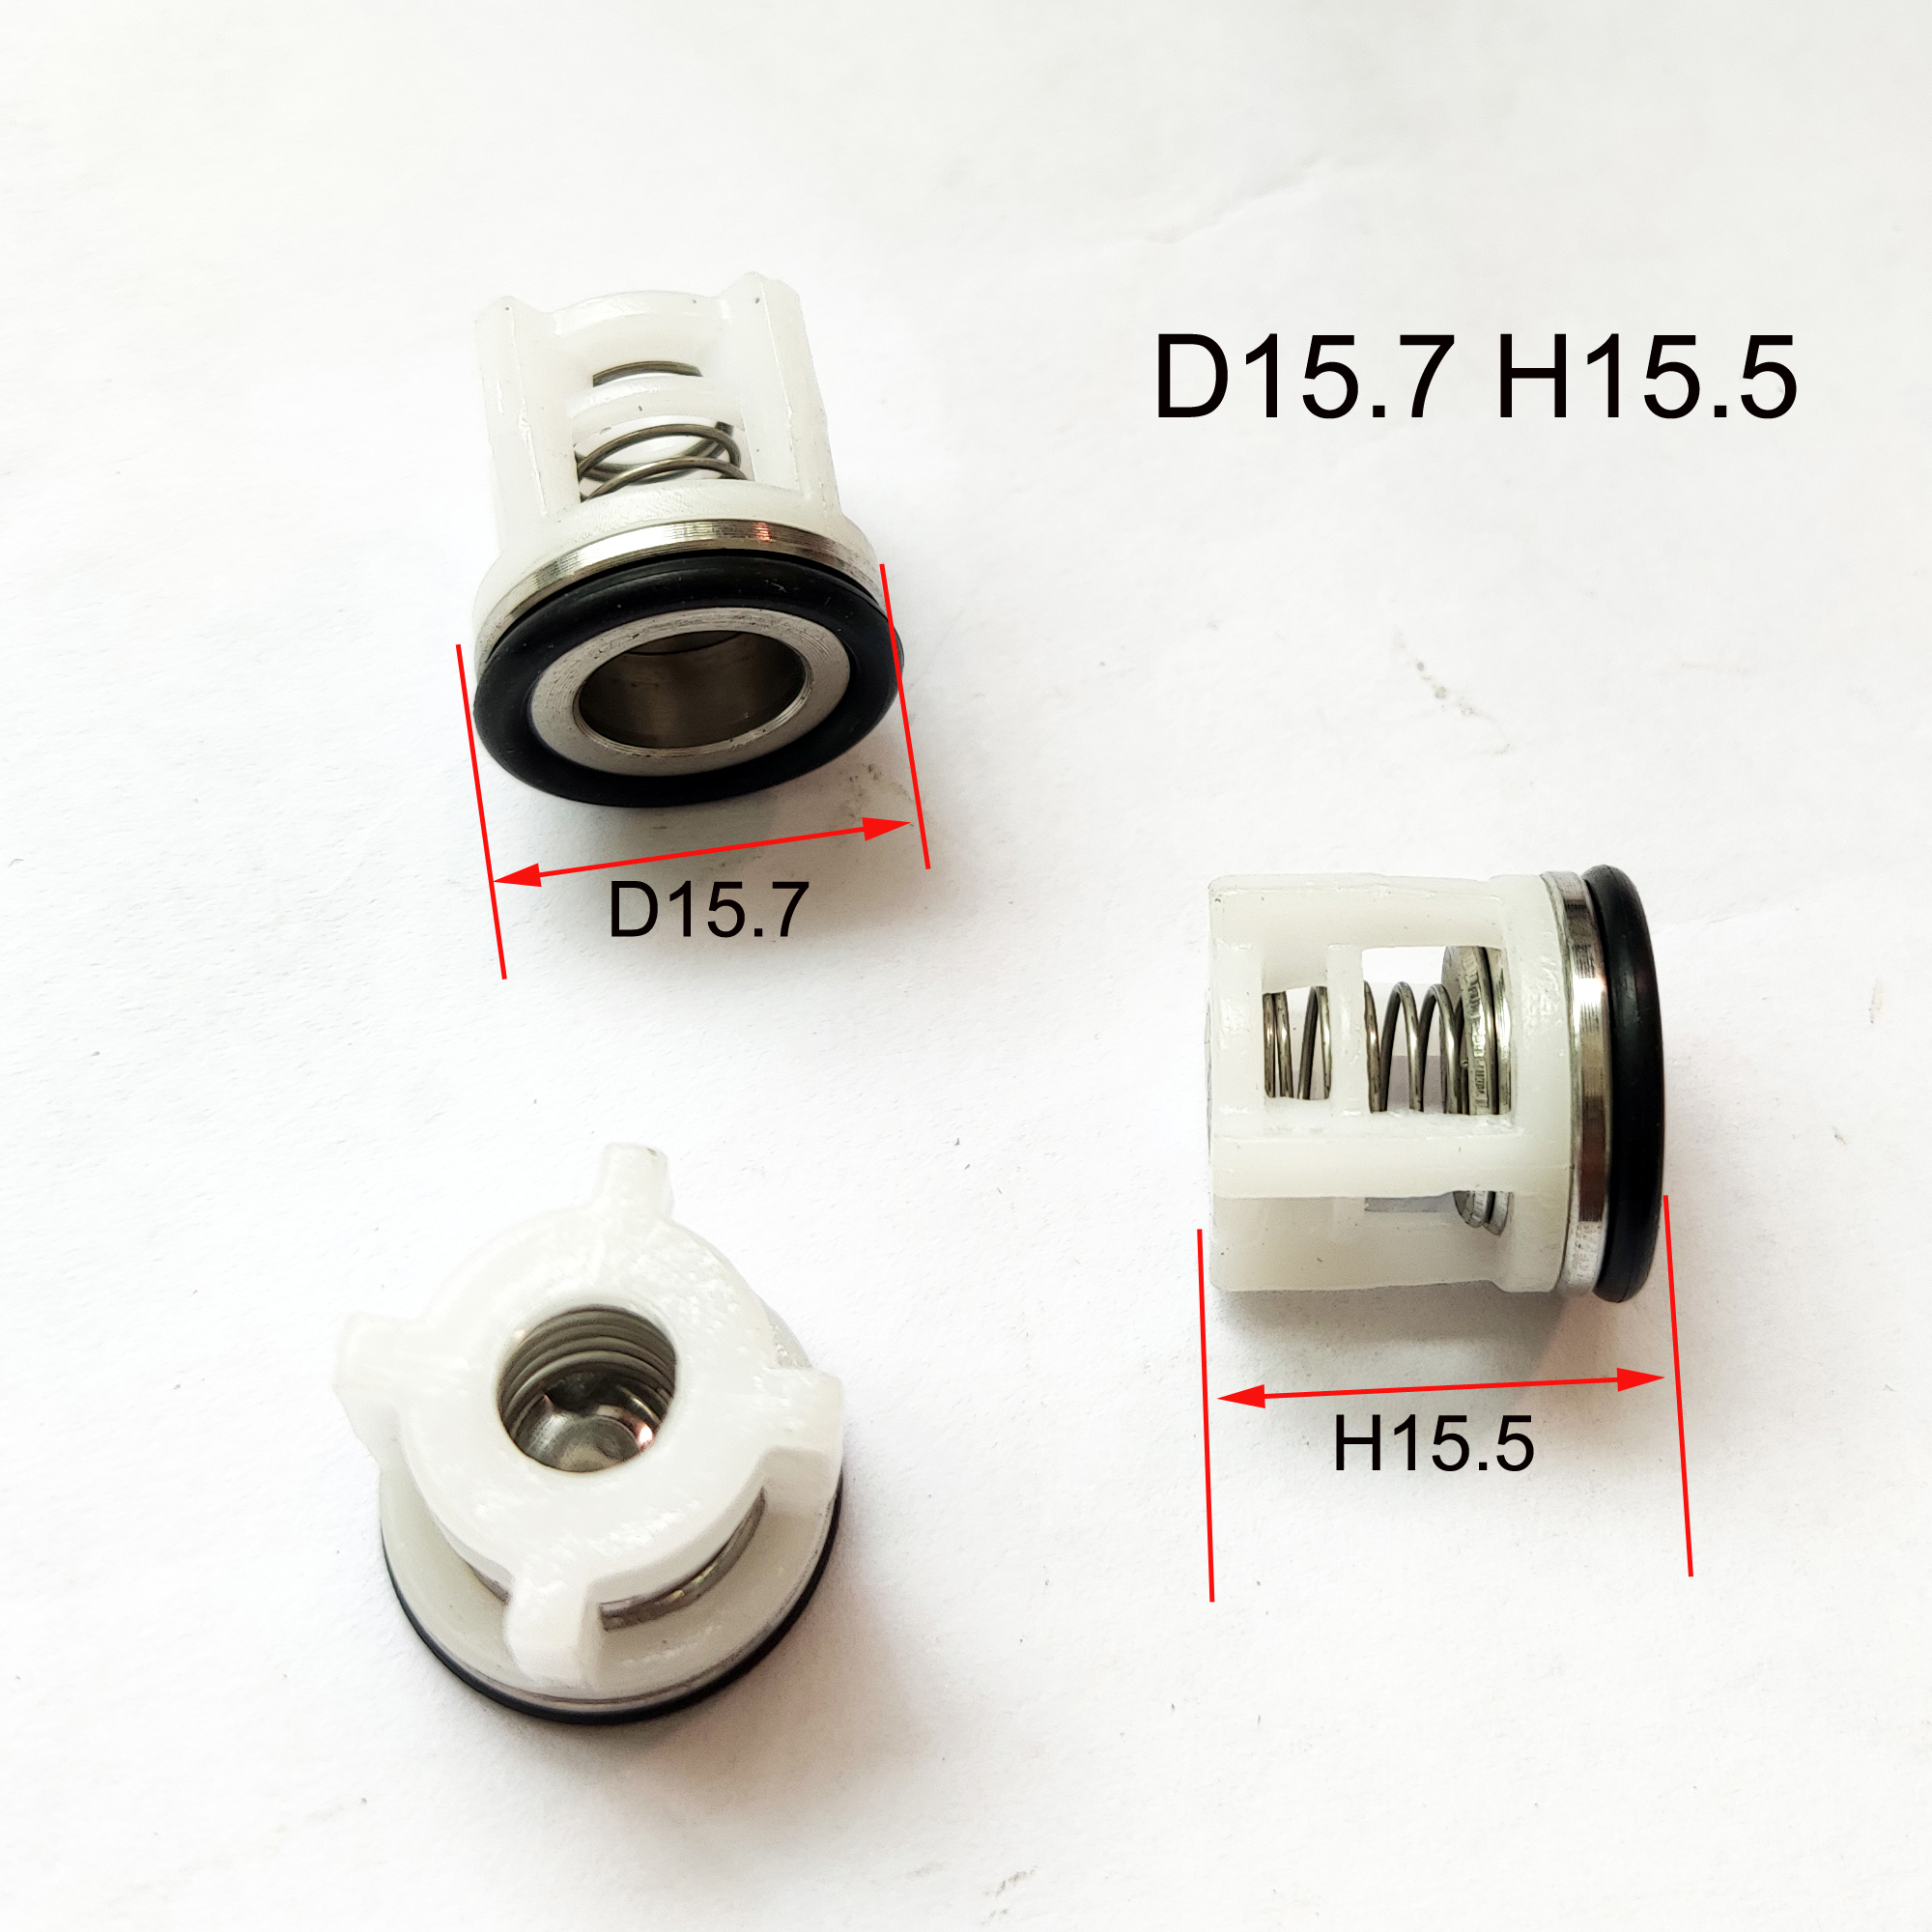 AR Check Valve Repair Kit Power High Pressure Car Washer Pump Head One Way Unidirectional Inlet Outlet 15 15.7 11.7 25